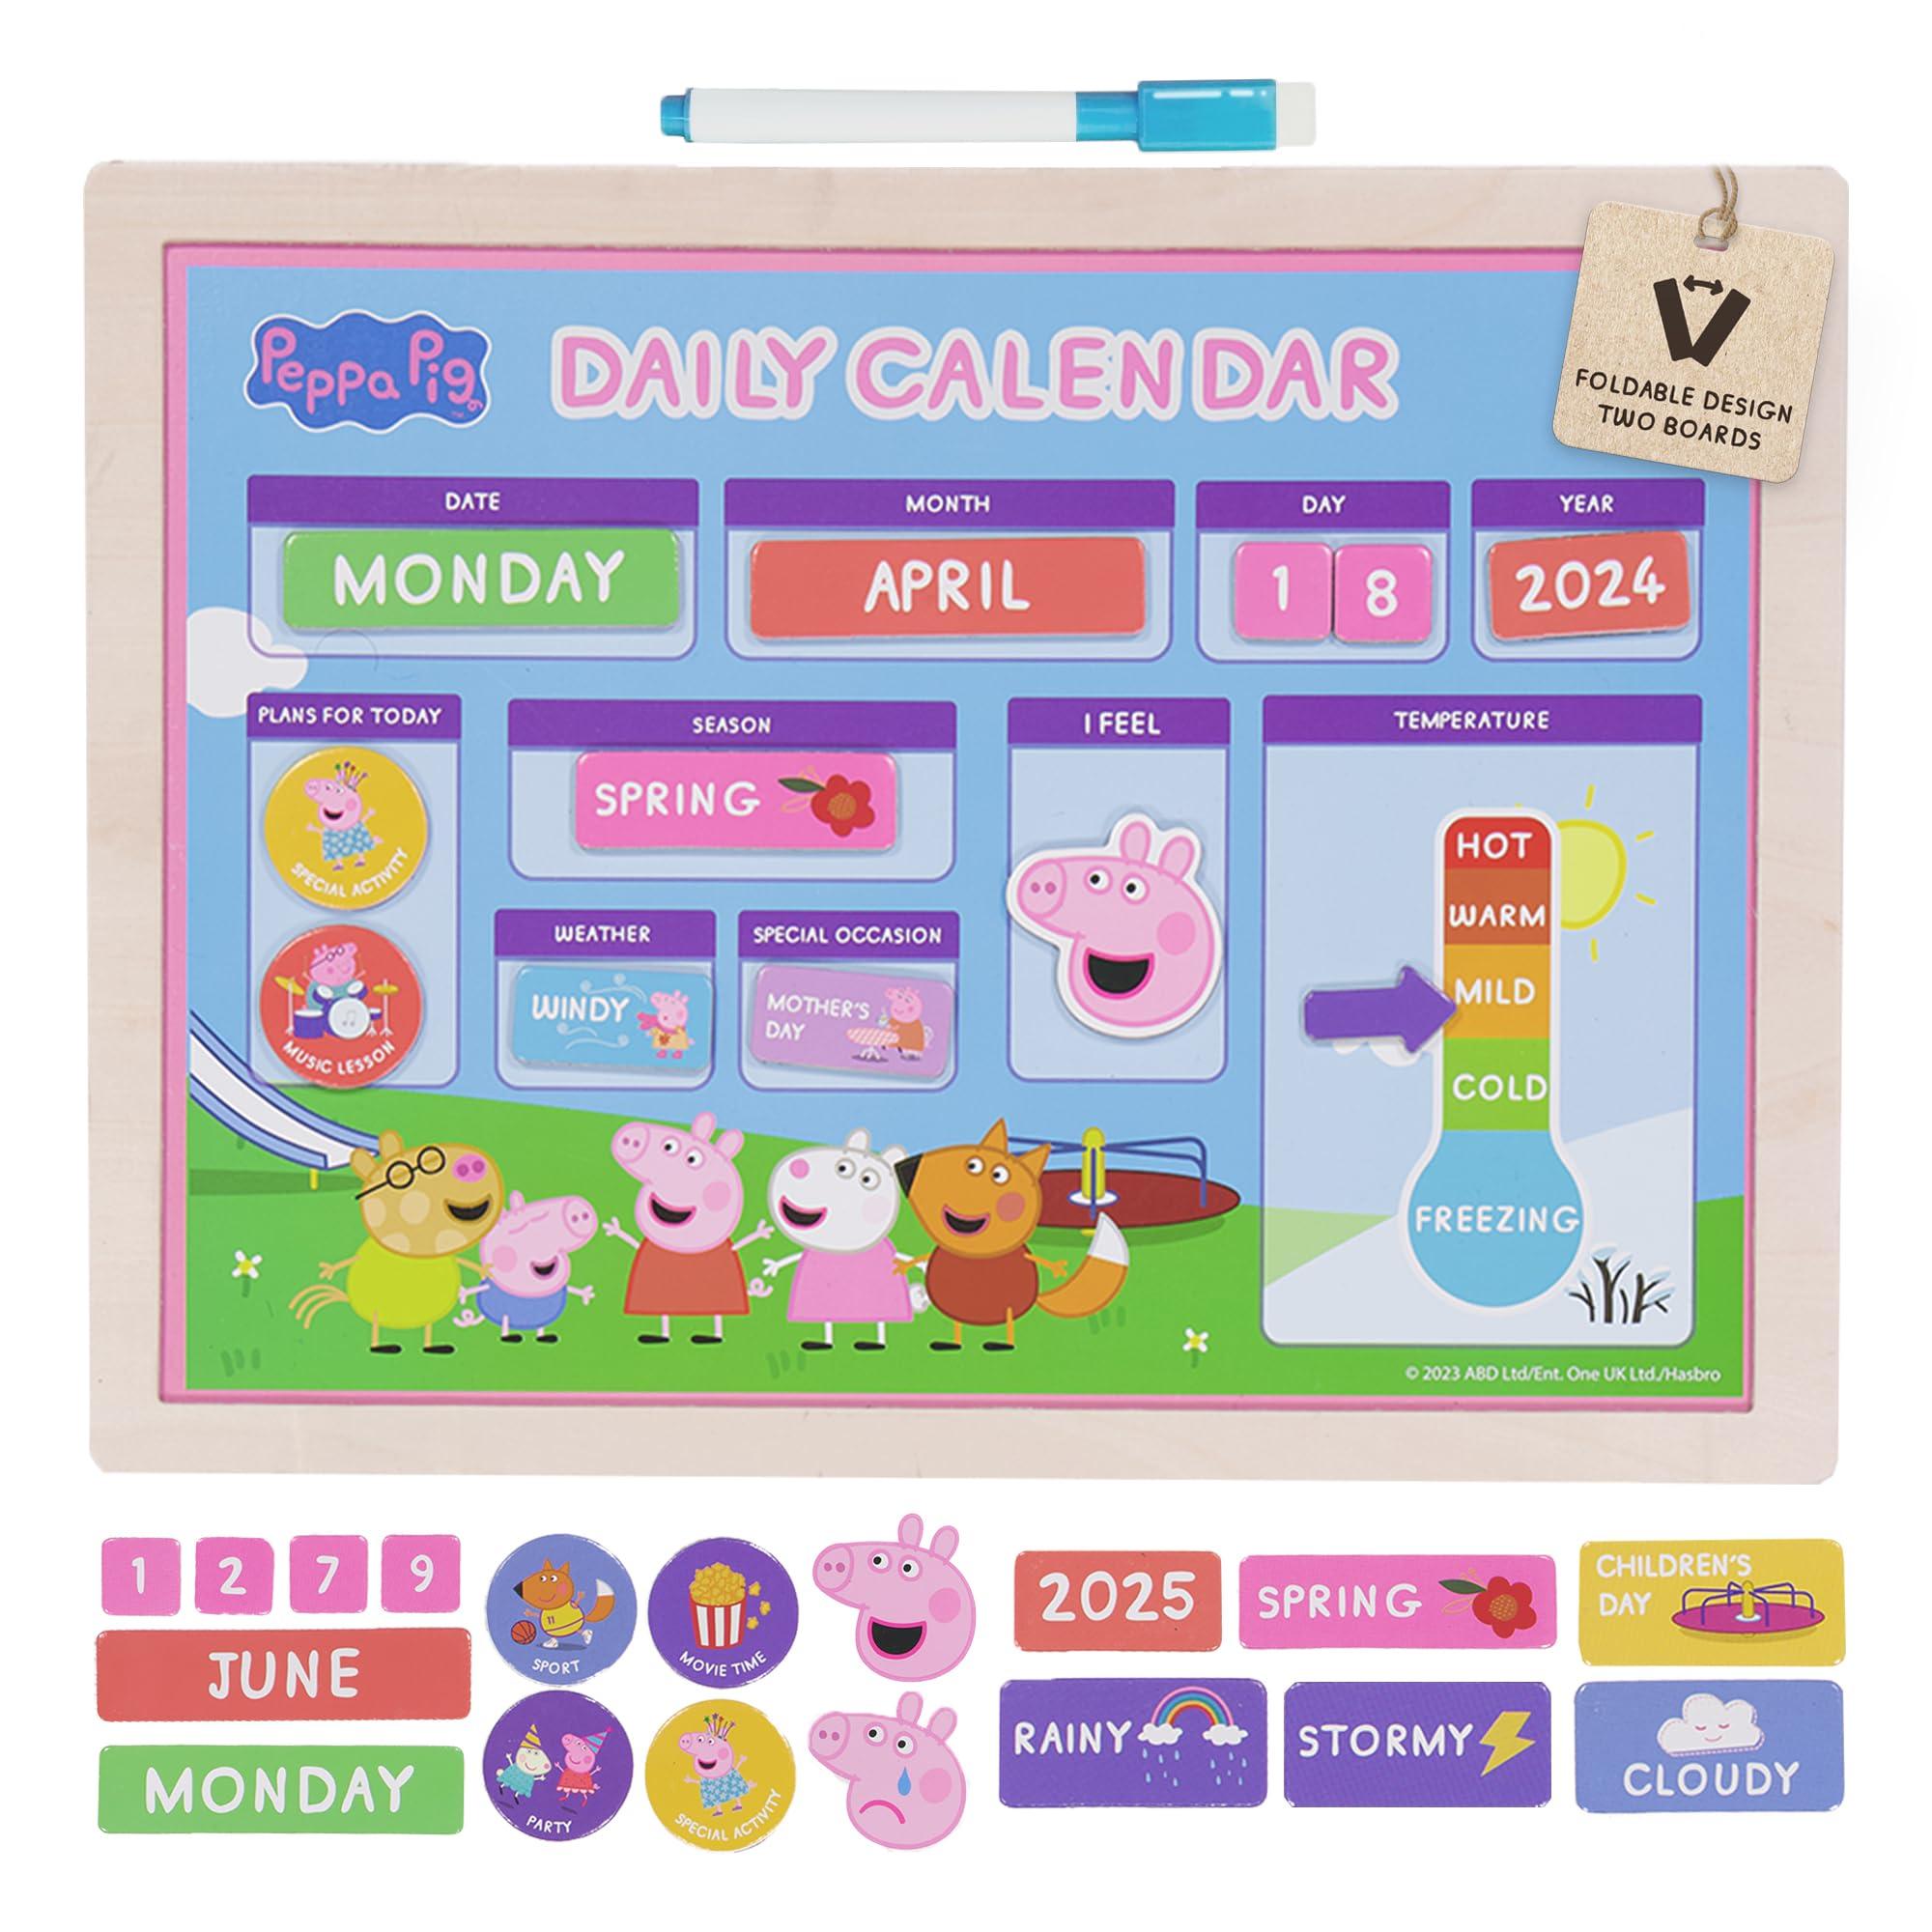 Kid's Wooden Magnetic Daily Calendar - Interactive Learning, Reusable Schedule, Fun Chore Chart - SparkJoy Set for a Colorful Daily Routine! Peppa Pig Wooden Calendar